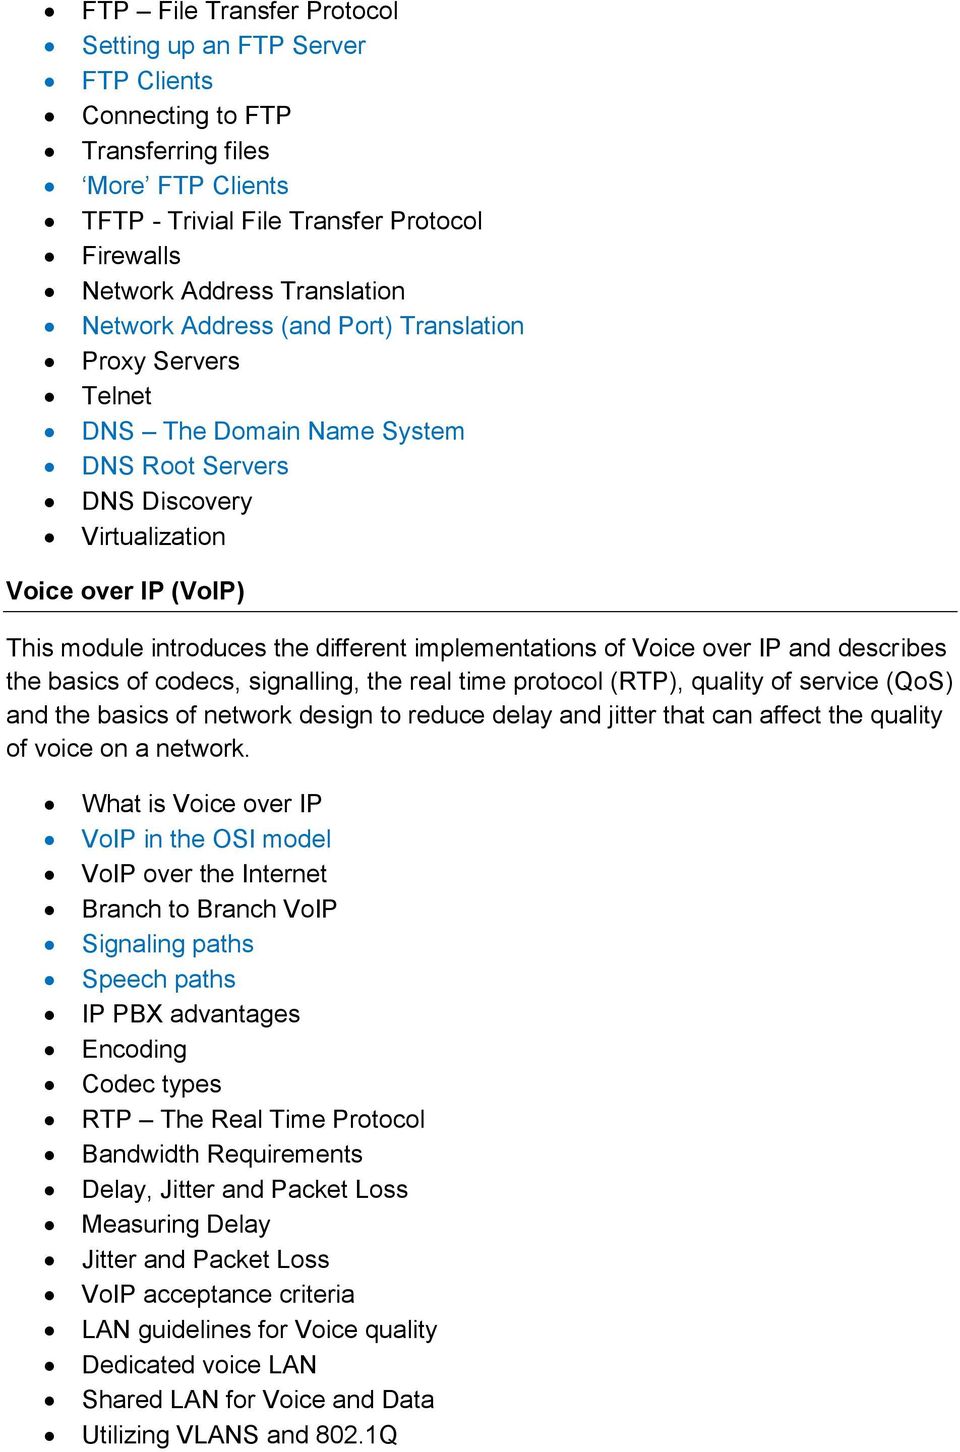 implementations of Voice over IP and describes the basics of codecs, signalling, the real time protocol (RTP), quality of service (QoS) and the basics of network design to reduce delay and jitter